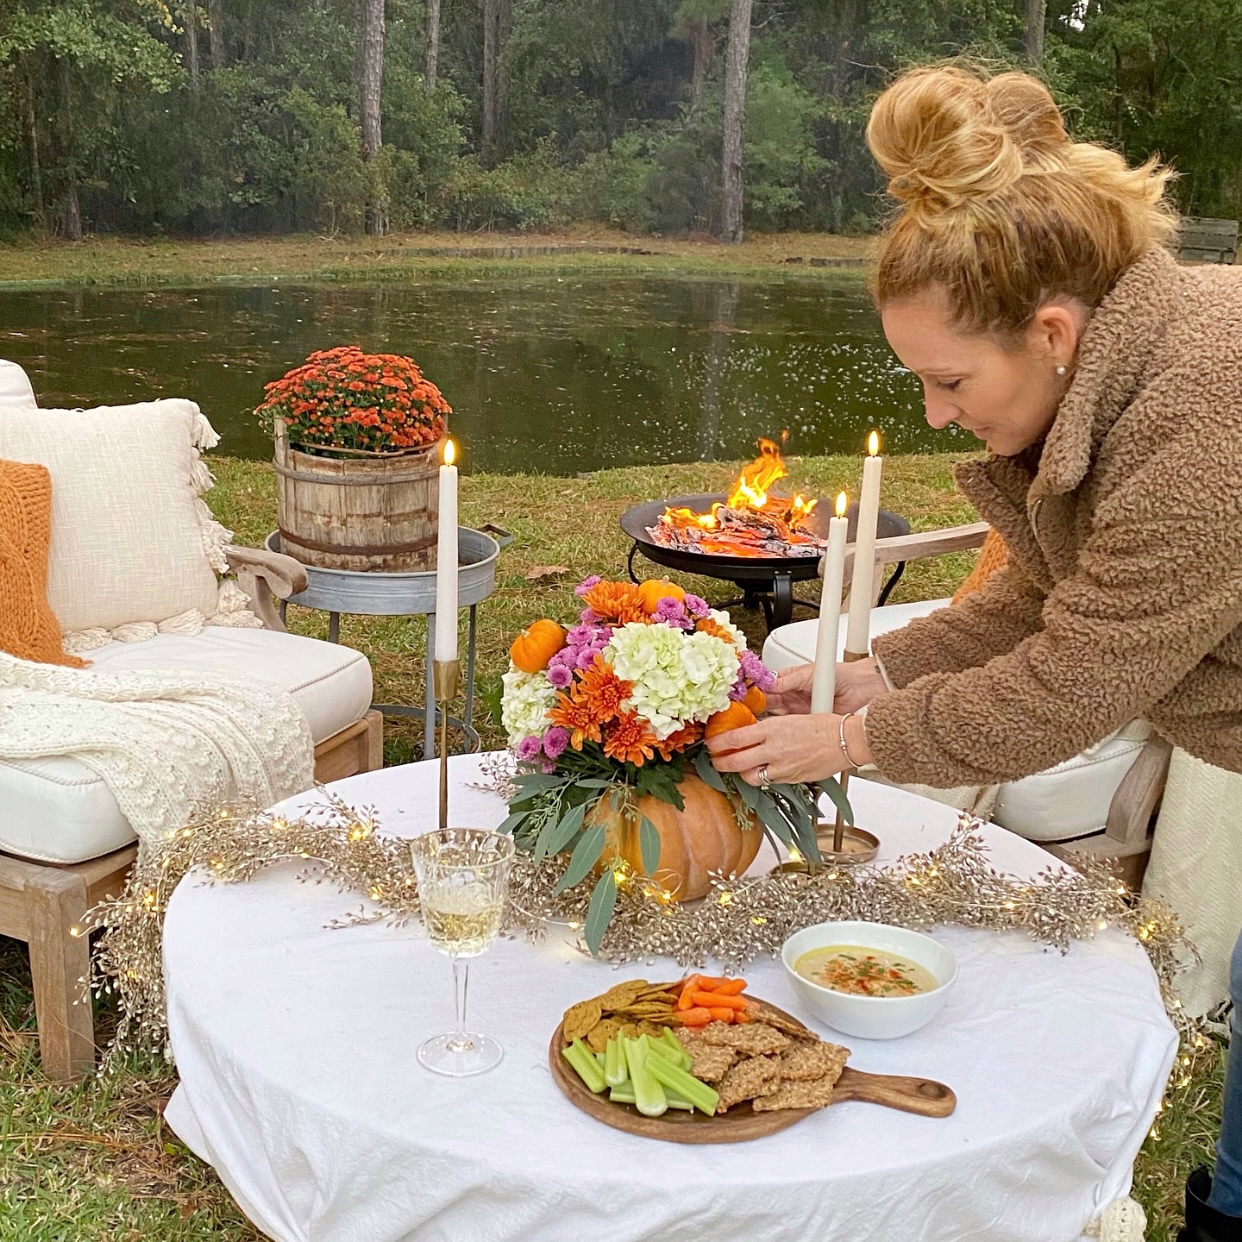 Me arranging fall florals on the table by the pond. A bonfire is lit, wine is poured and snacks are out.